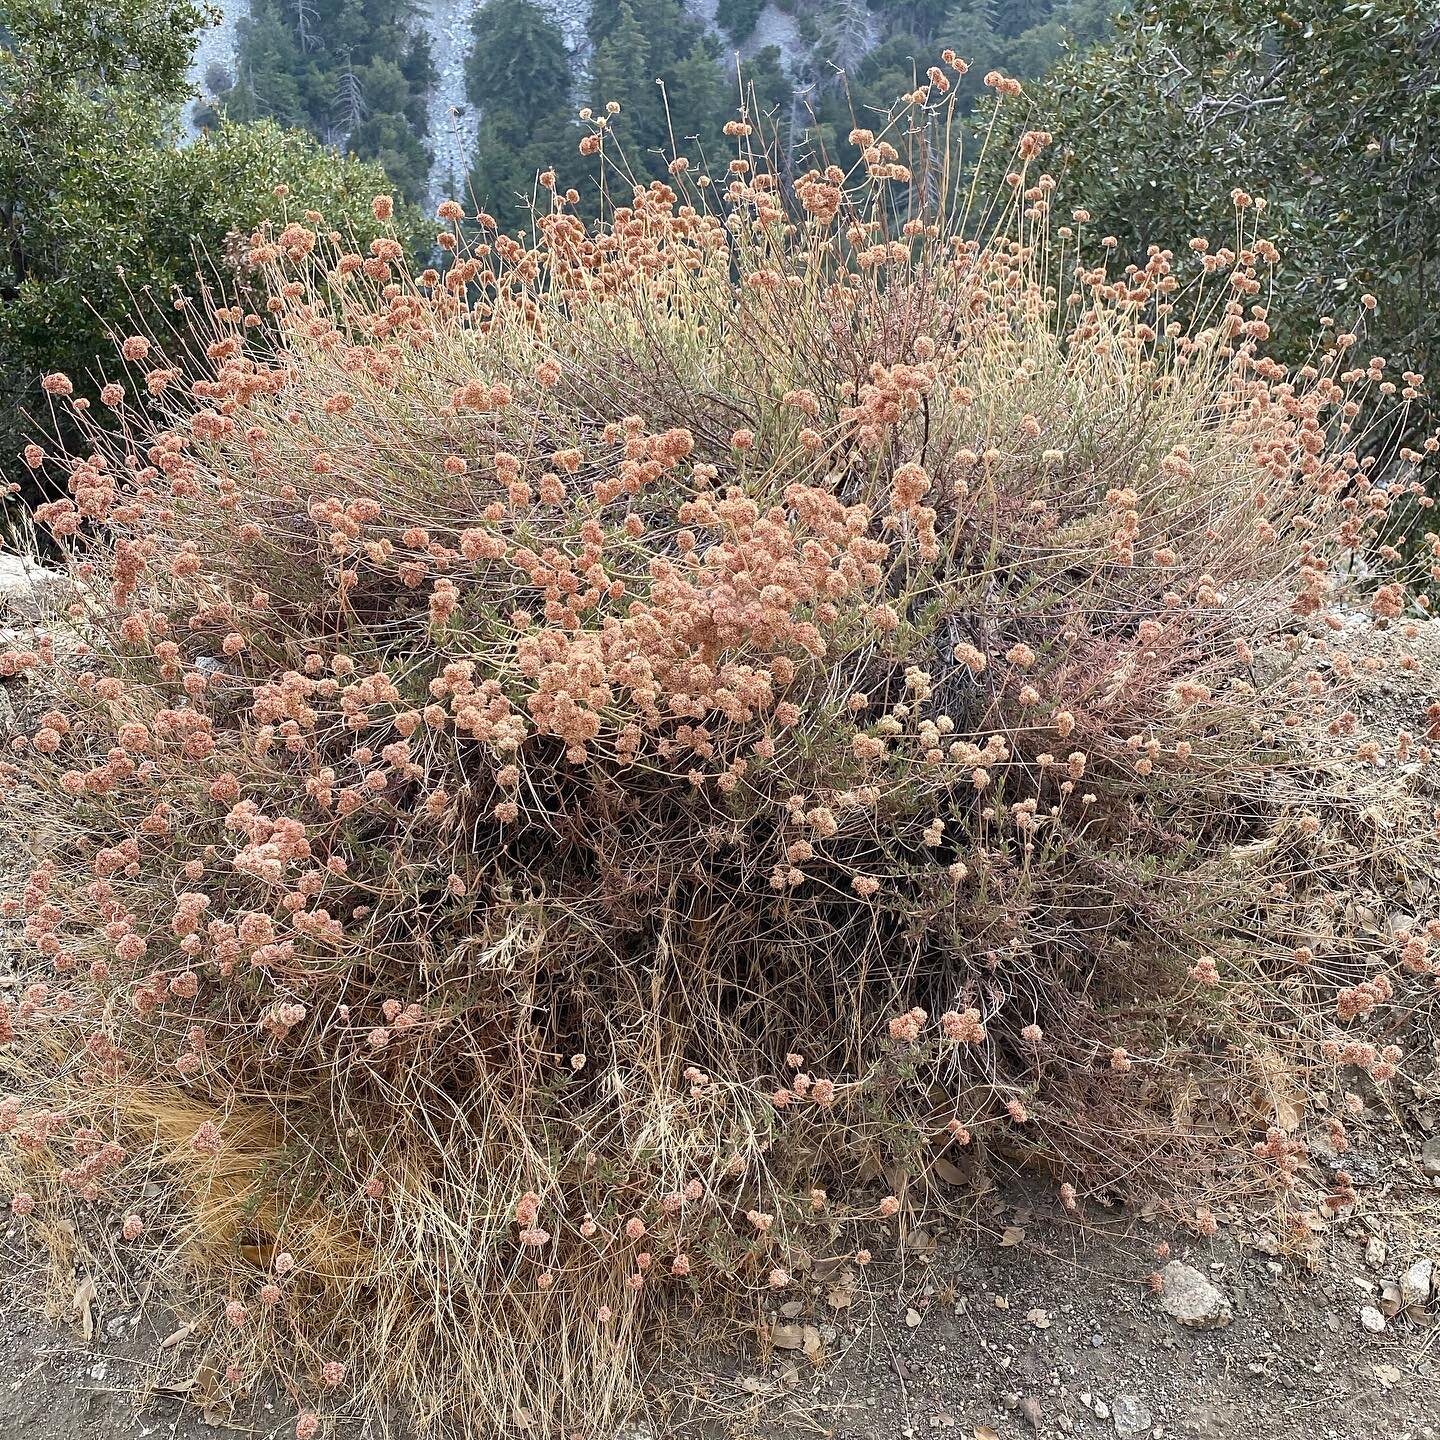 Episode 4 - California Buckwheat (and a bit of Spanish Broom) 

This area was partially burned in the Bobcat fire- please donate to the wildfire relief fund! (Link in episode description) 

This is my favorite episode for meditation so far - I recent